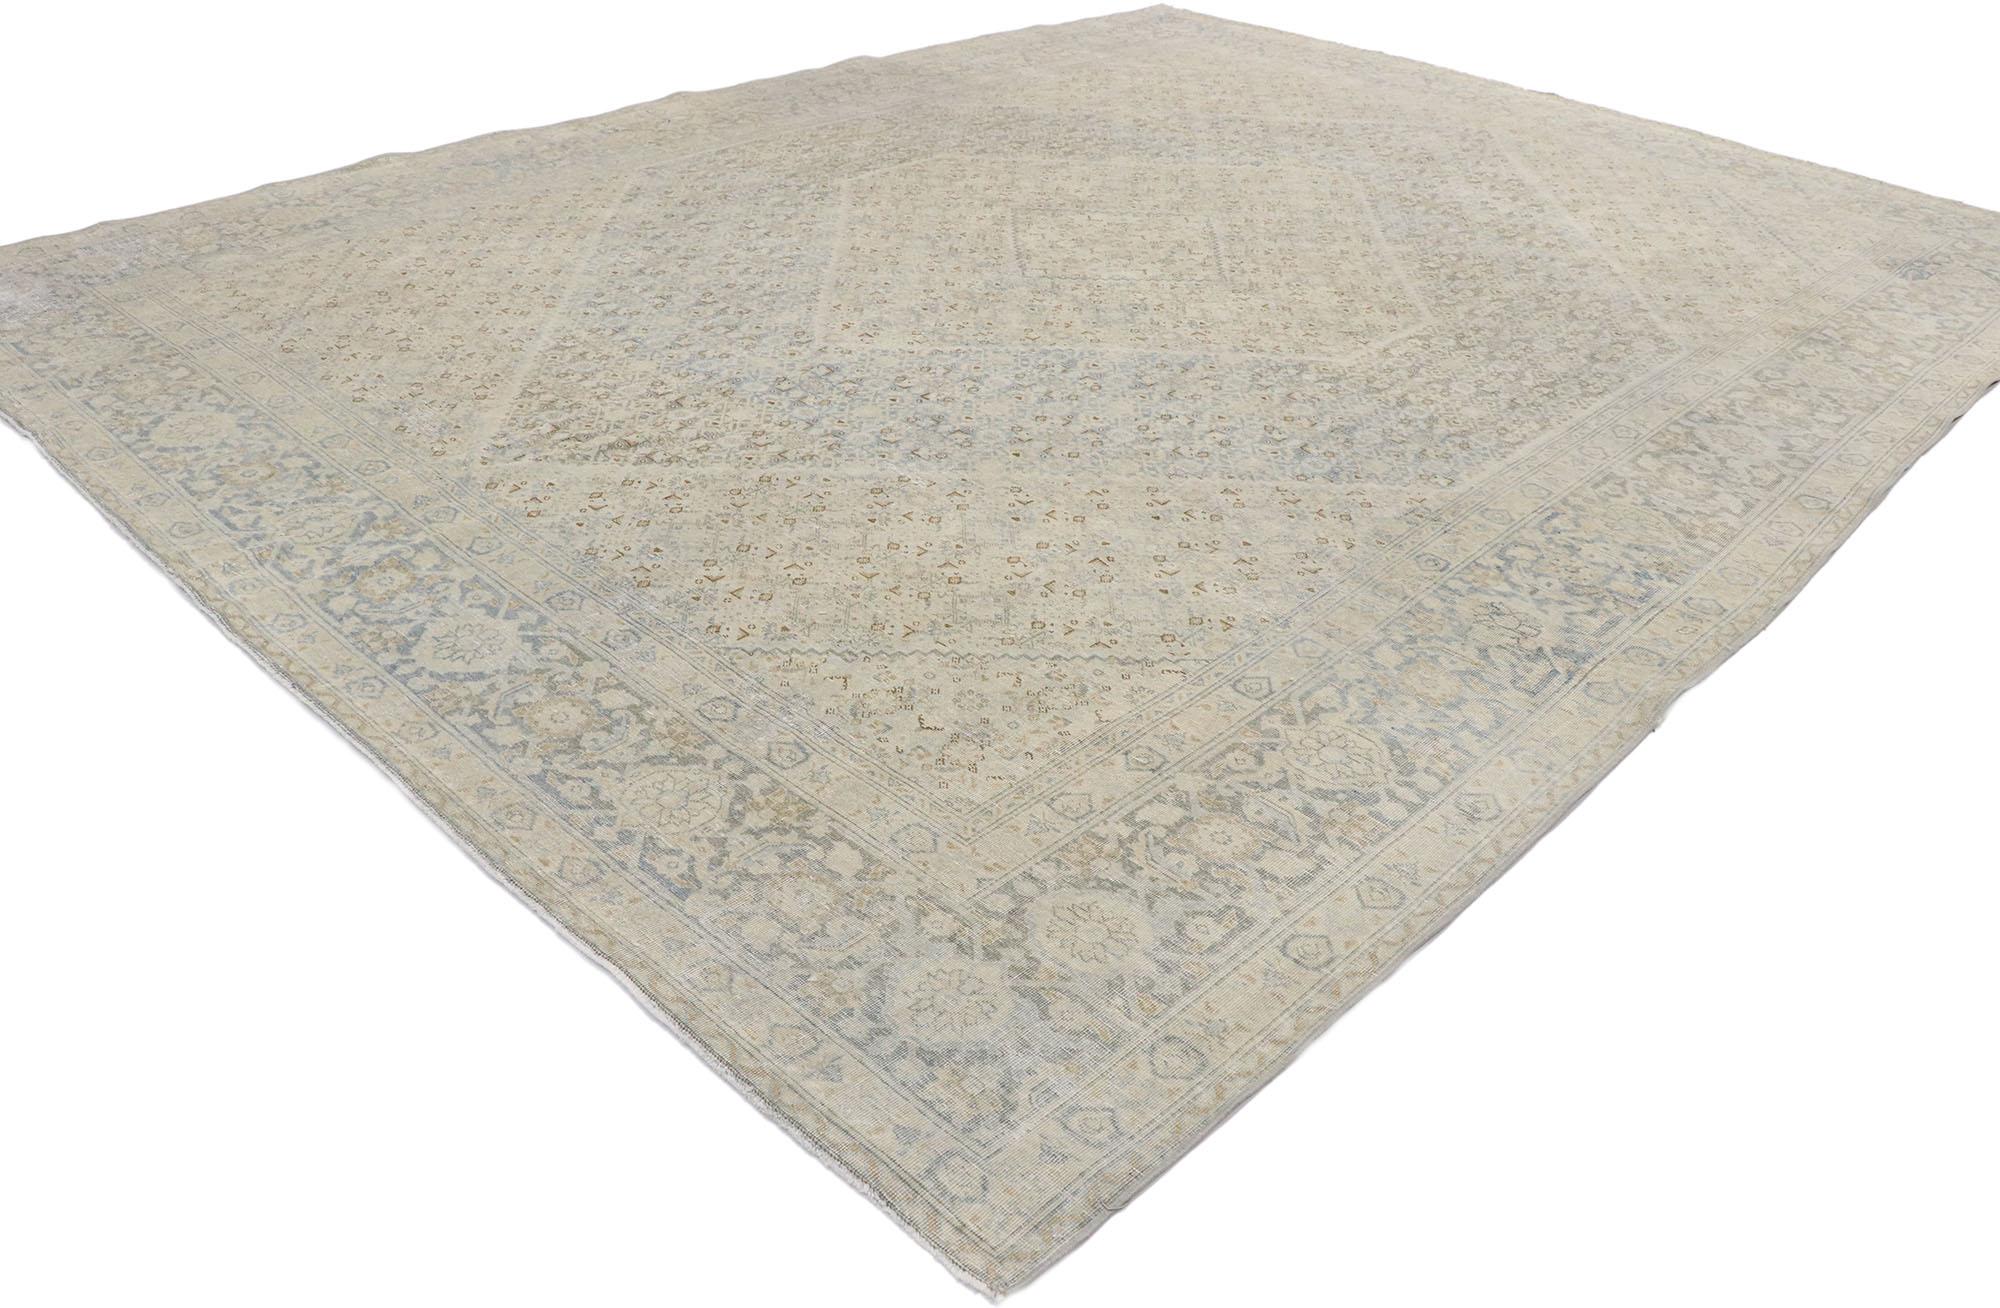 53274, distressed vintage Persian Mahi Tabriz rug with English Country Cottage style. Light and airy with rustic sensibility, this hand knotted wool vintage Persian Tabriz rug is poised to impress. The antique washed field features a hexagonal